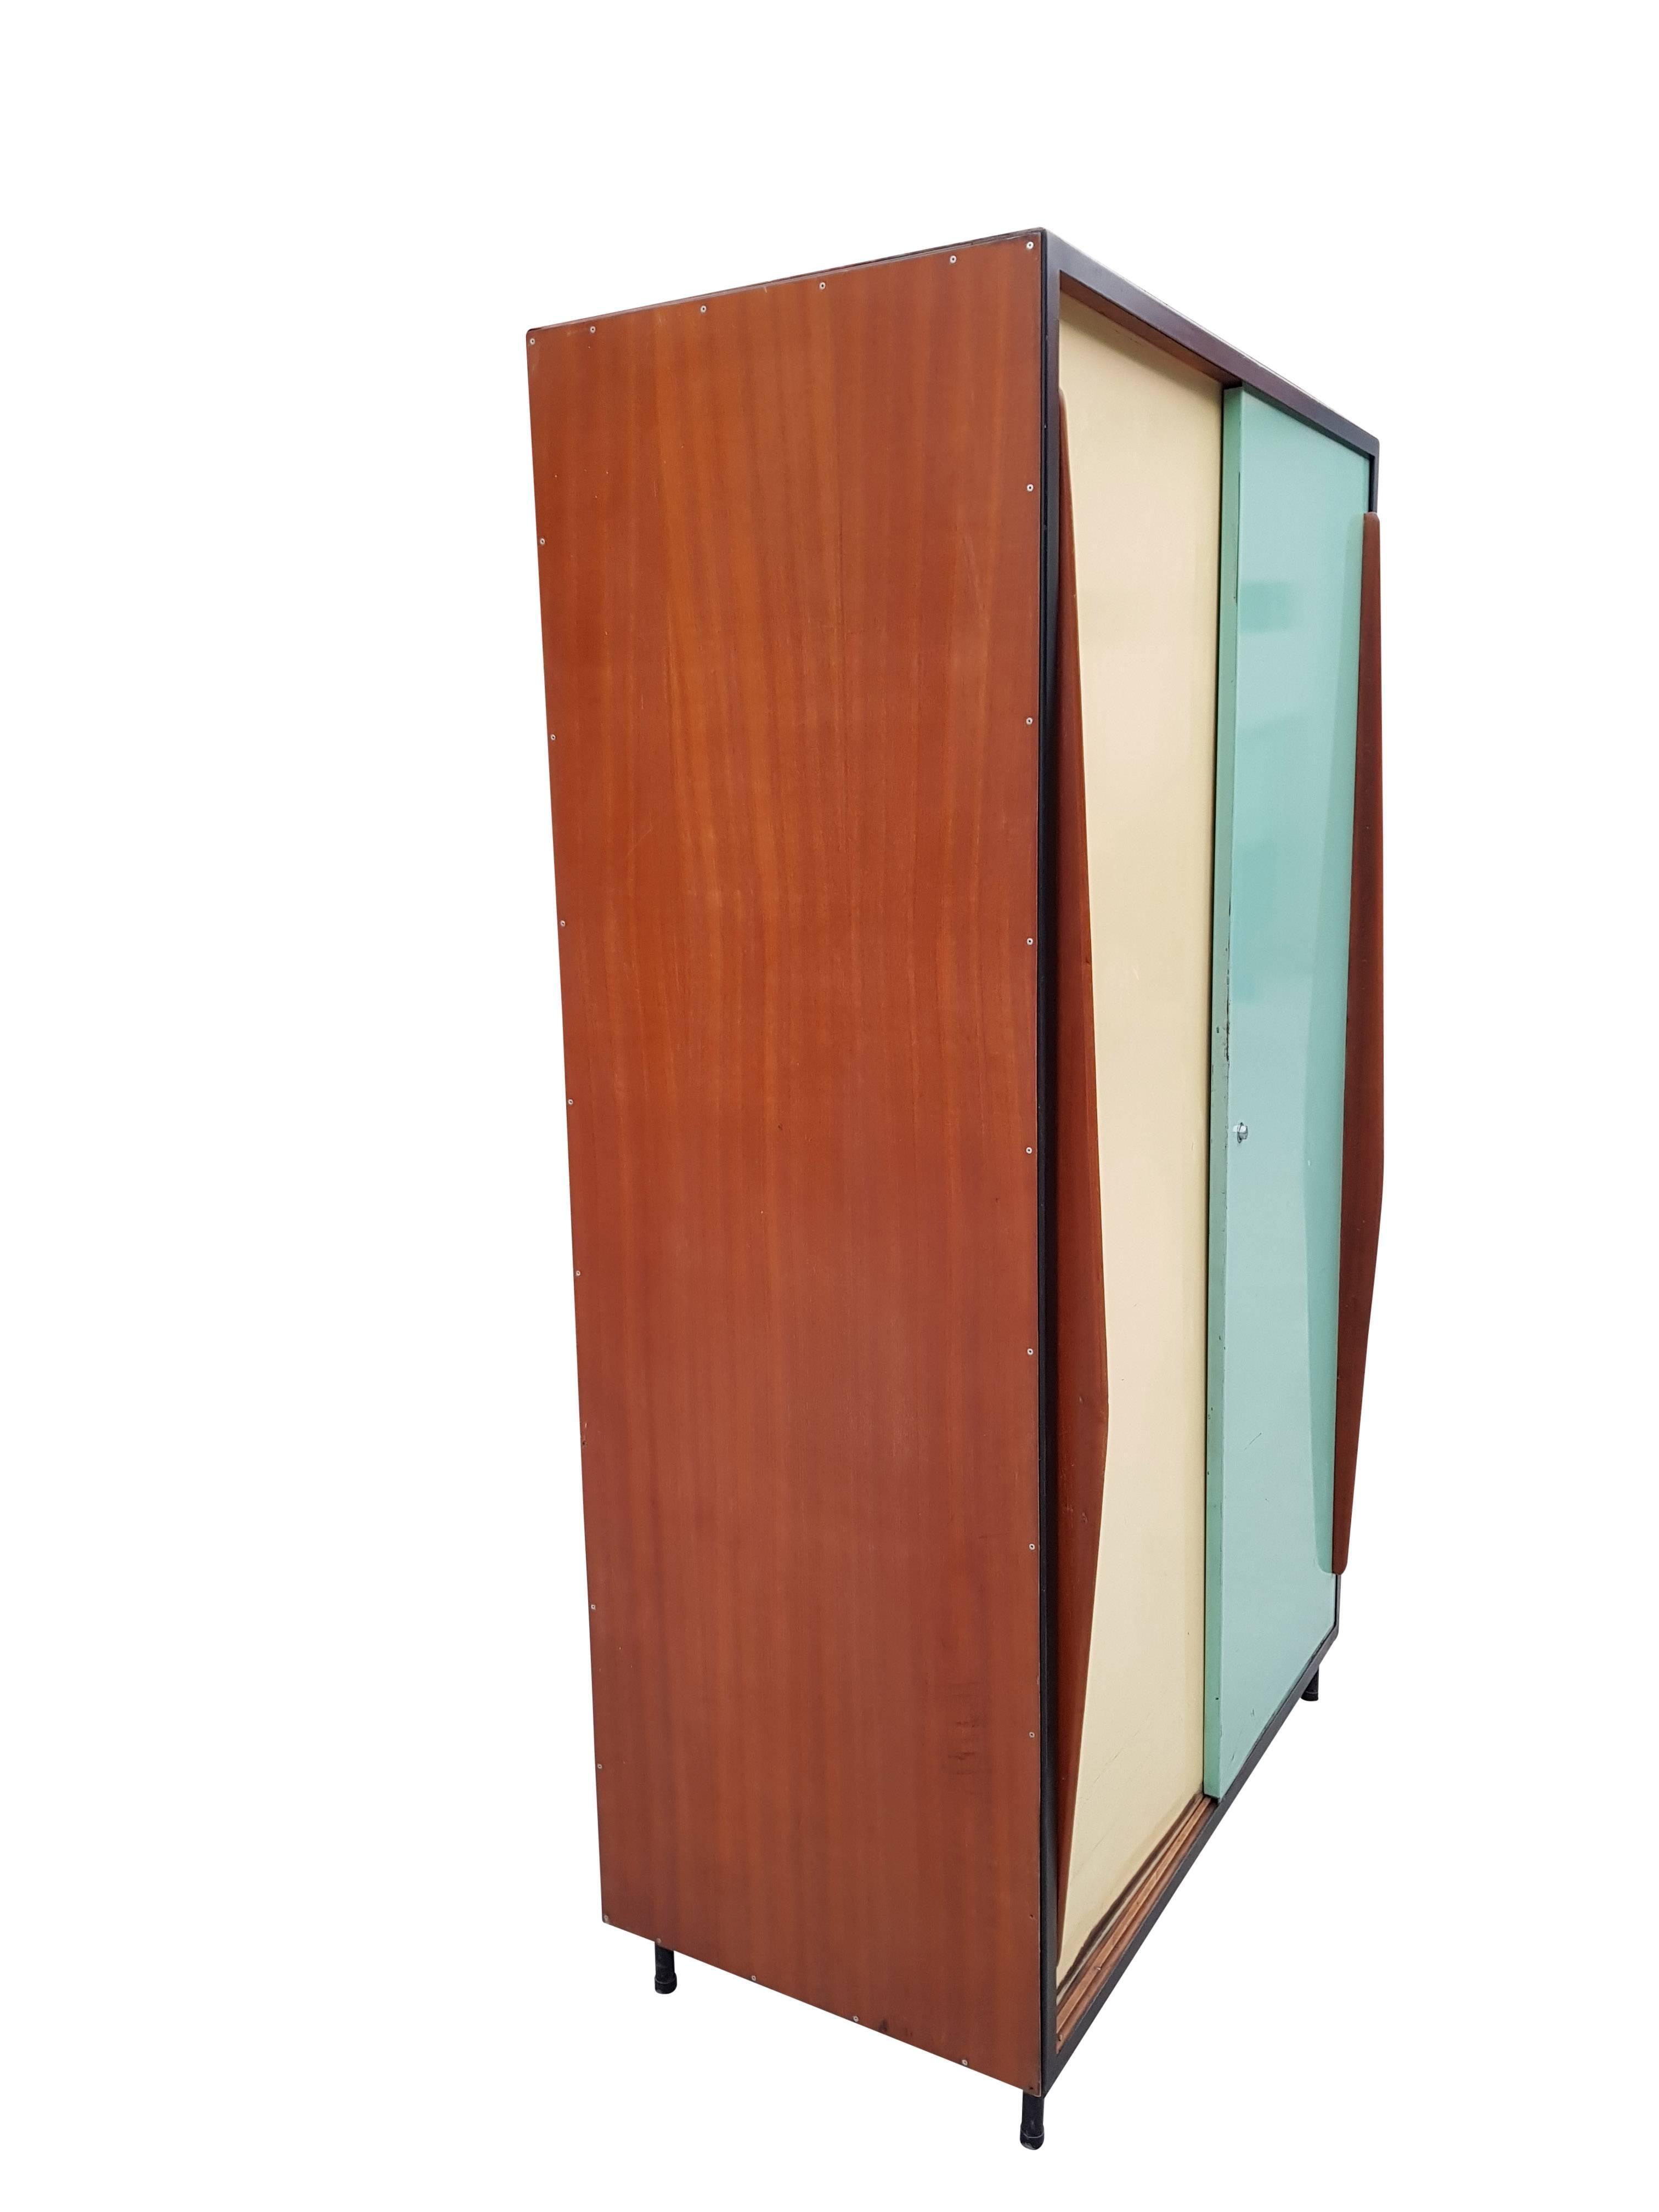 Original cabinet designed by the Belgium architect Willy Van Der Meeren for Tubax.
The cabinet has plywood sides. The back of the cabinet is provided with a black metal panel. On the front side there are two sliding doors in original colors with